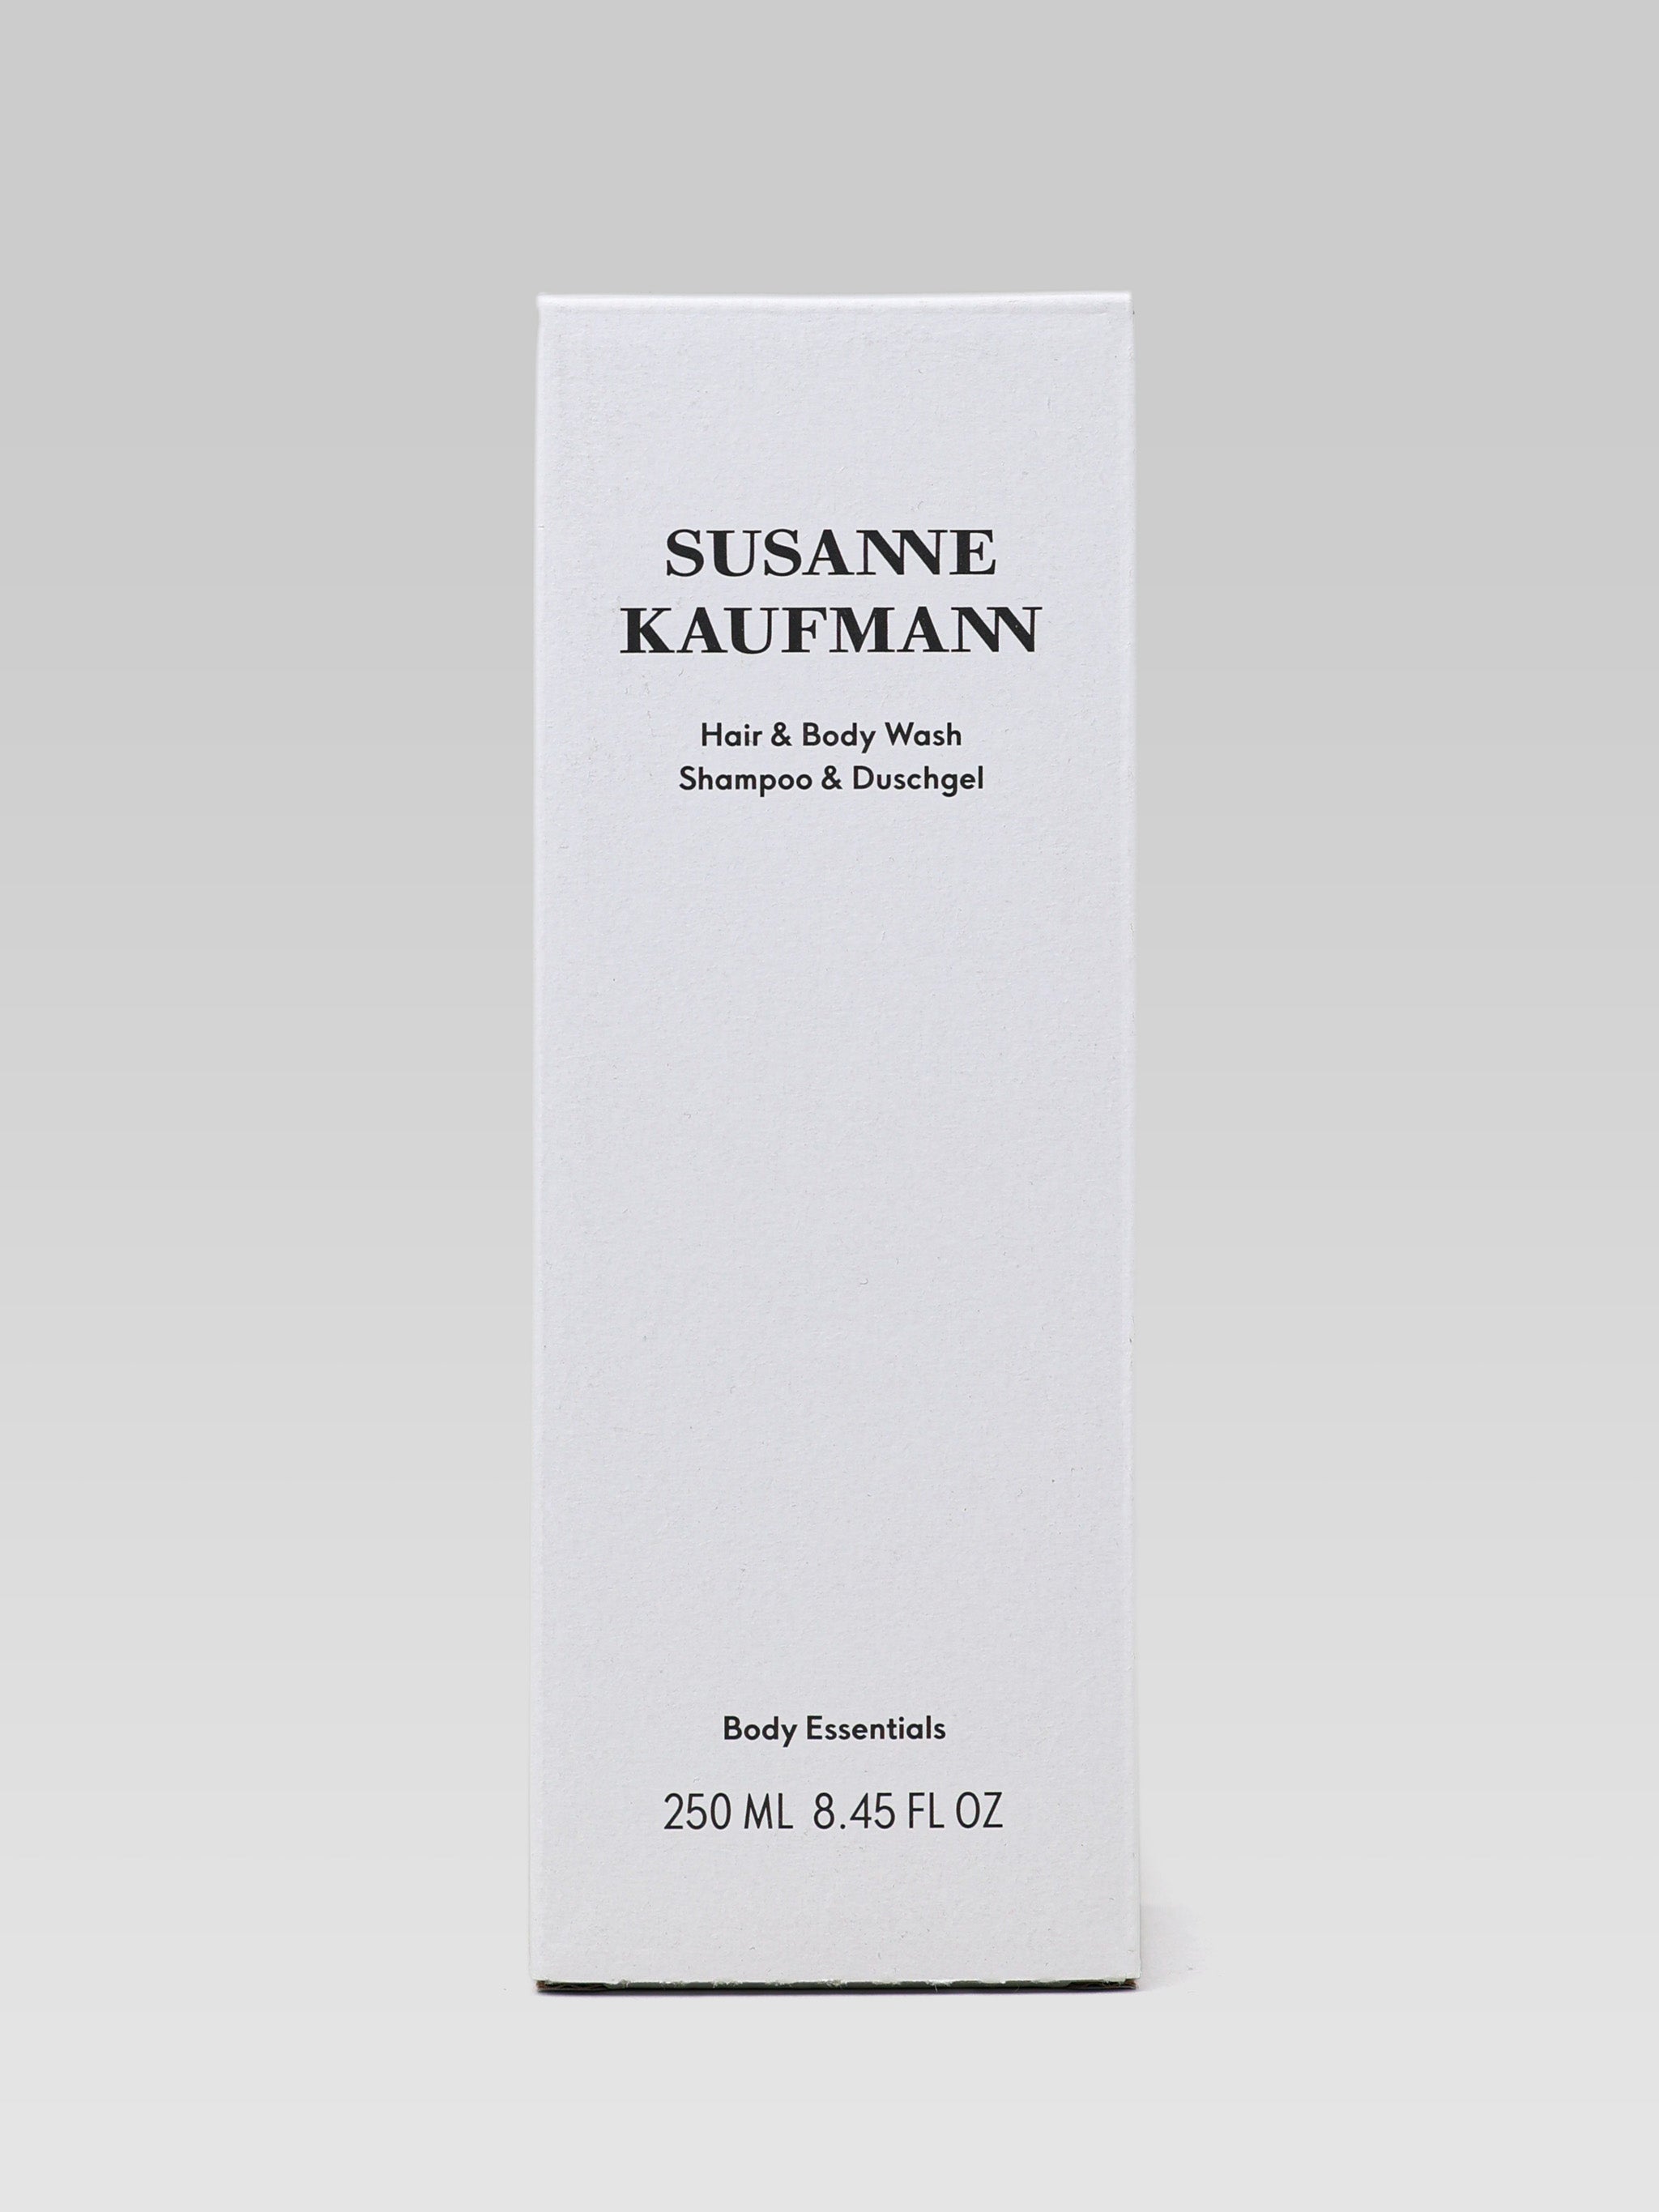 Susanne Kaufmann Hair and Body Wash product packaging 